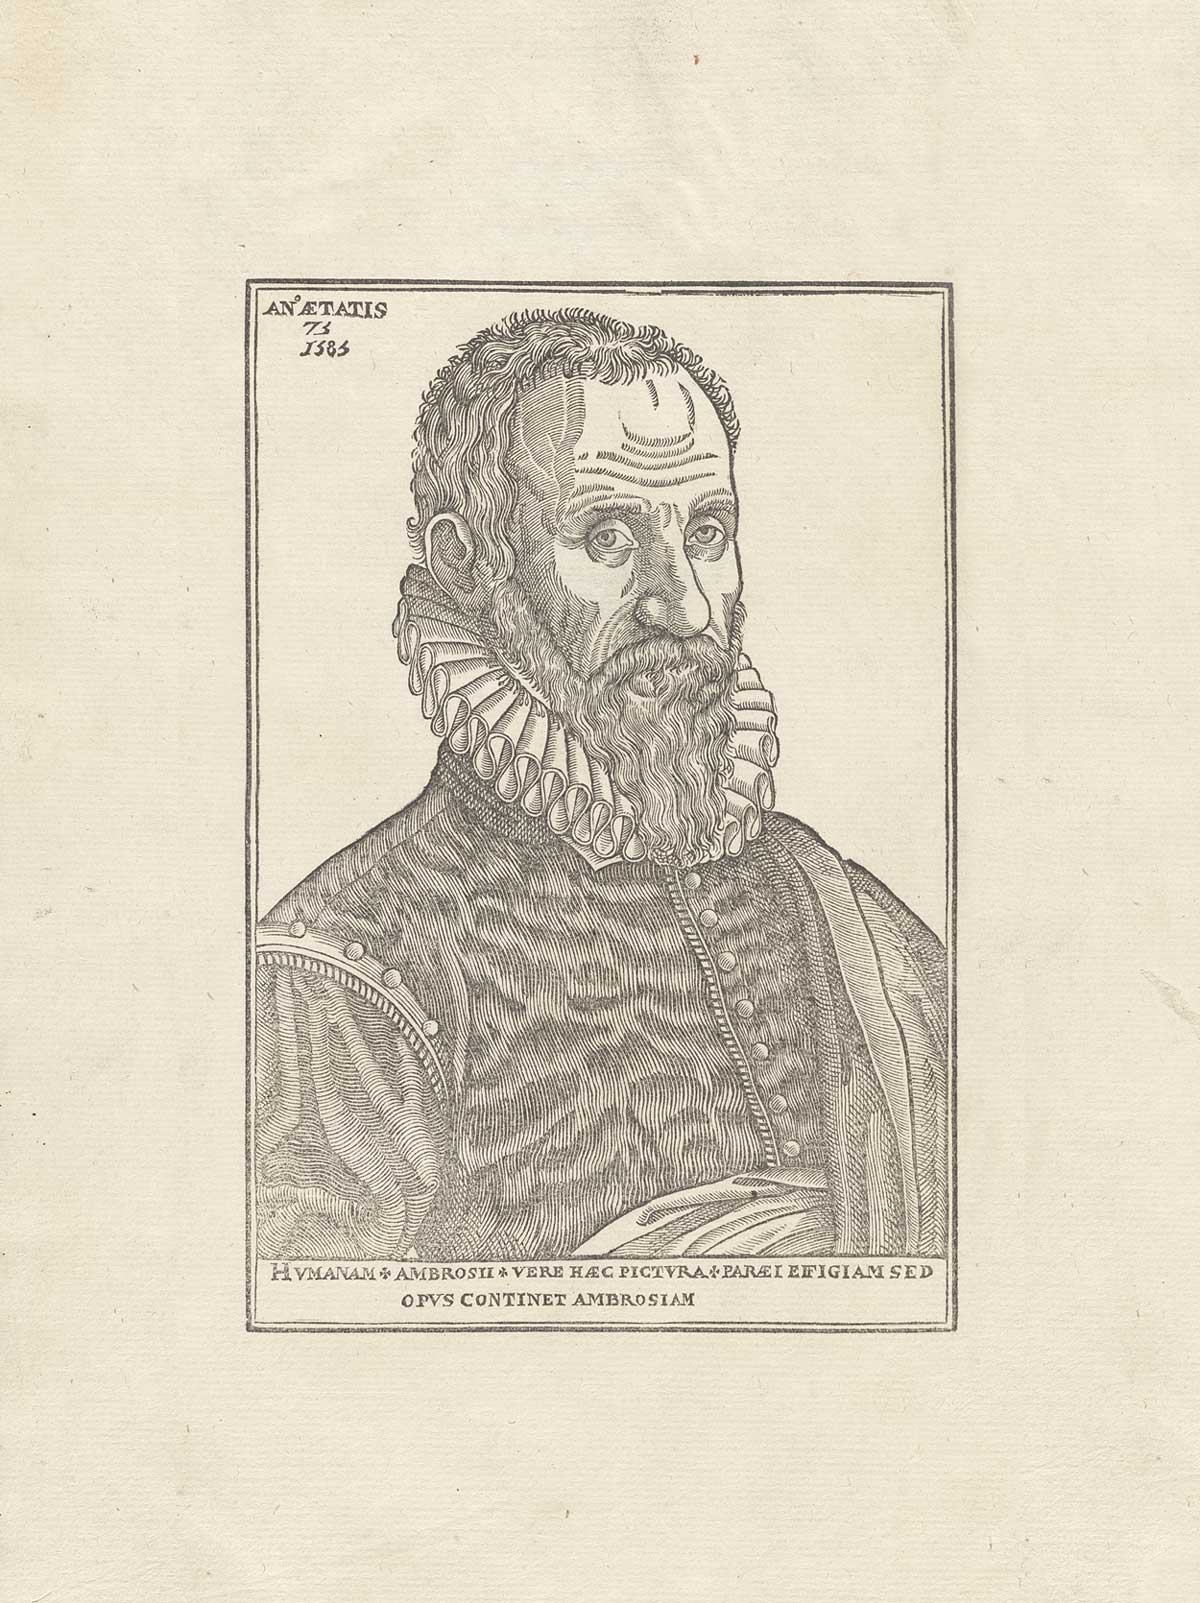 Woodcut portrait of Ambroise Paré, showing head and shoulders, right pose, from his Oeuvres, NLM Call no.: WZ 240 P227 1585.